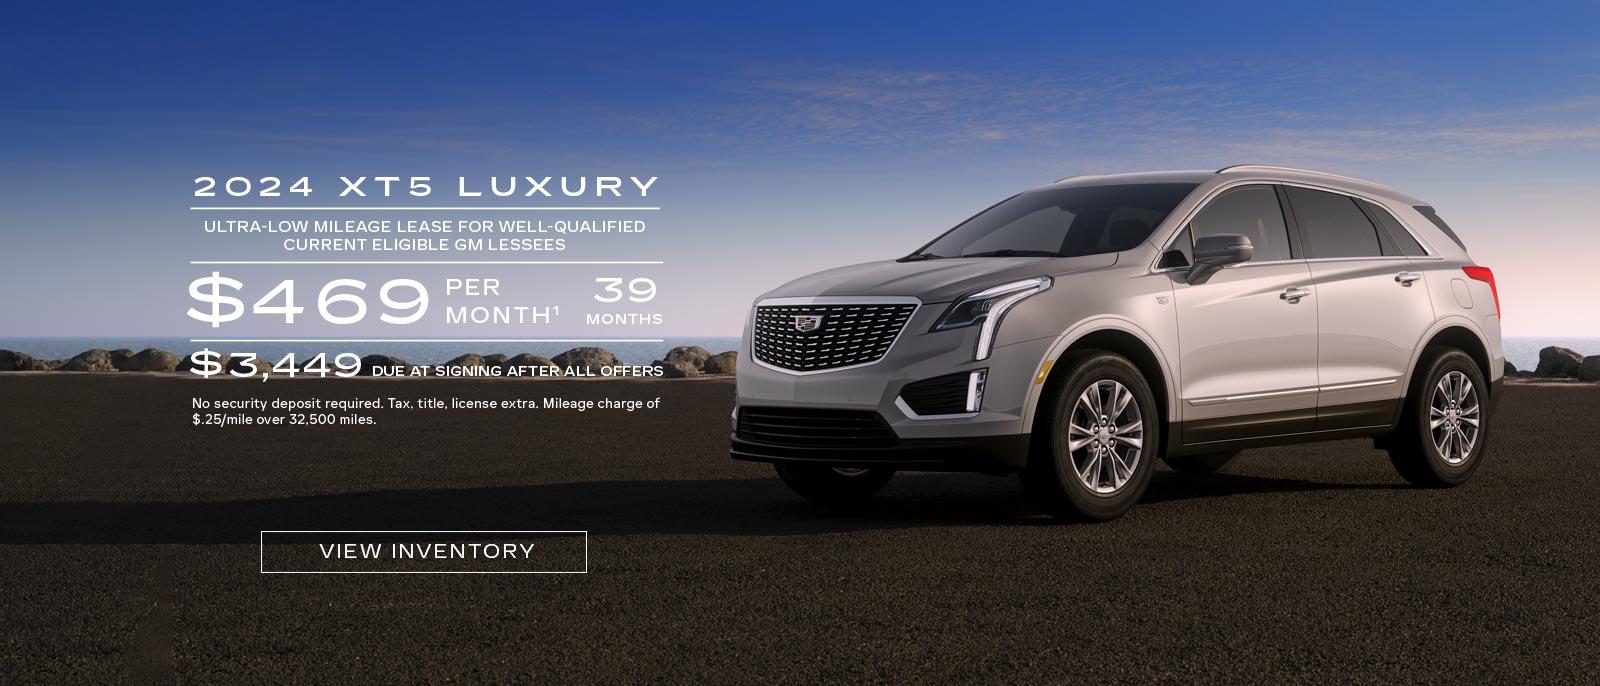 2024 XT5 Luxury. Ultra-low mileage lease for well-qualified current eligible Non-GM Lessees. $469 per month. 39 months. $3,449 due at signing after all offers.